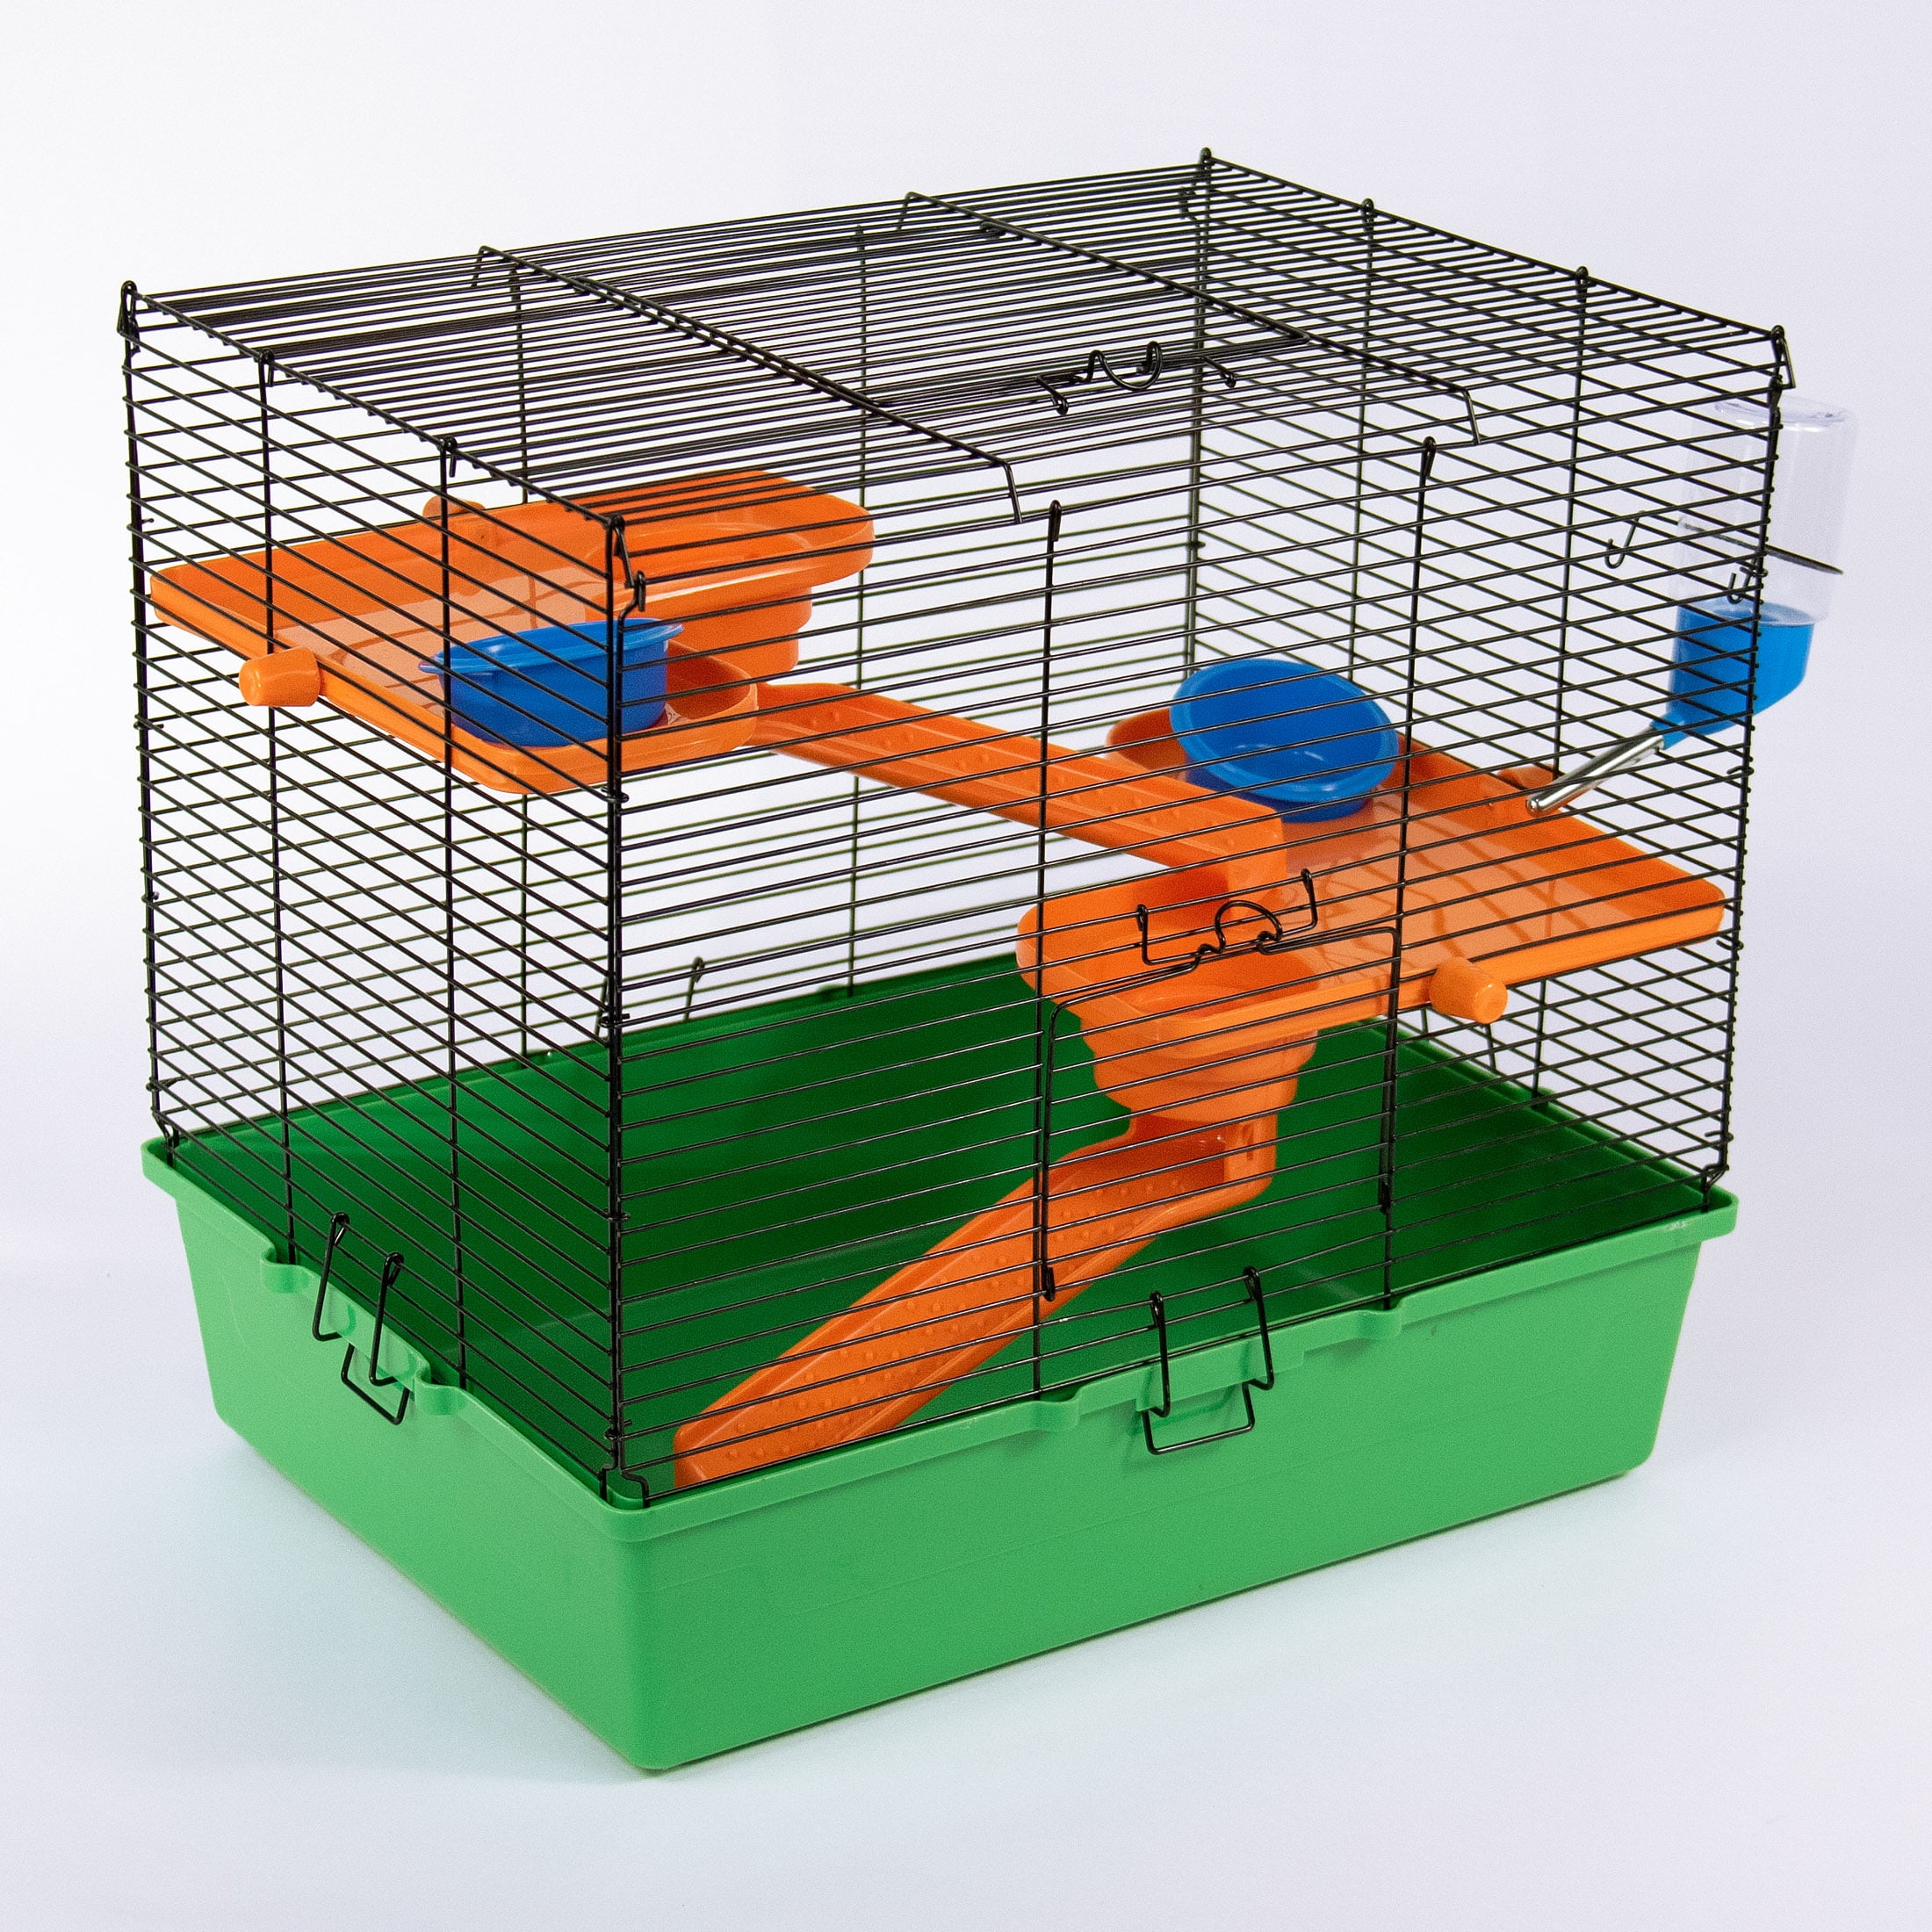 7. Wide range of plastic habitats available for small pets like hamsters and mice